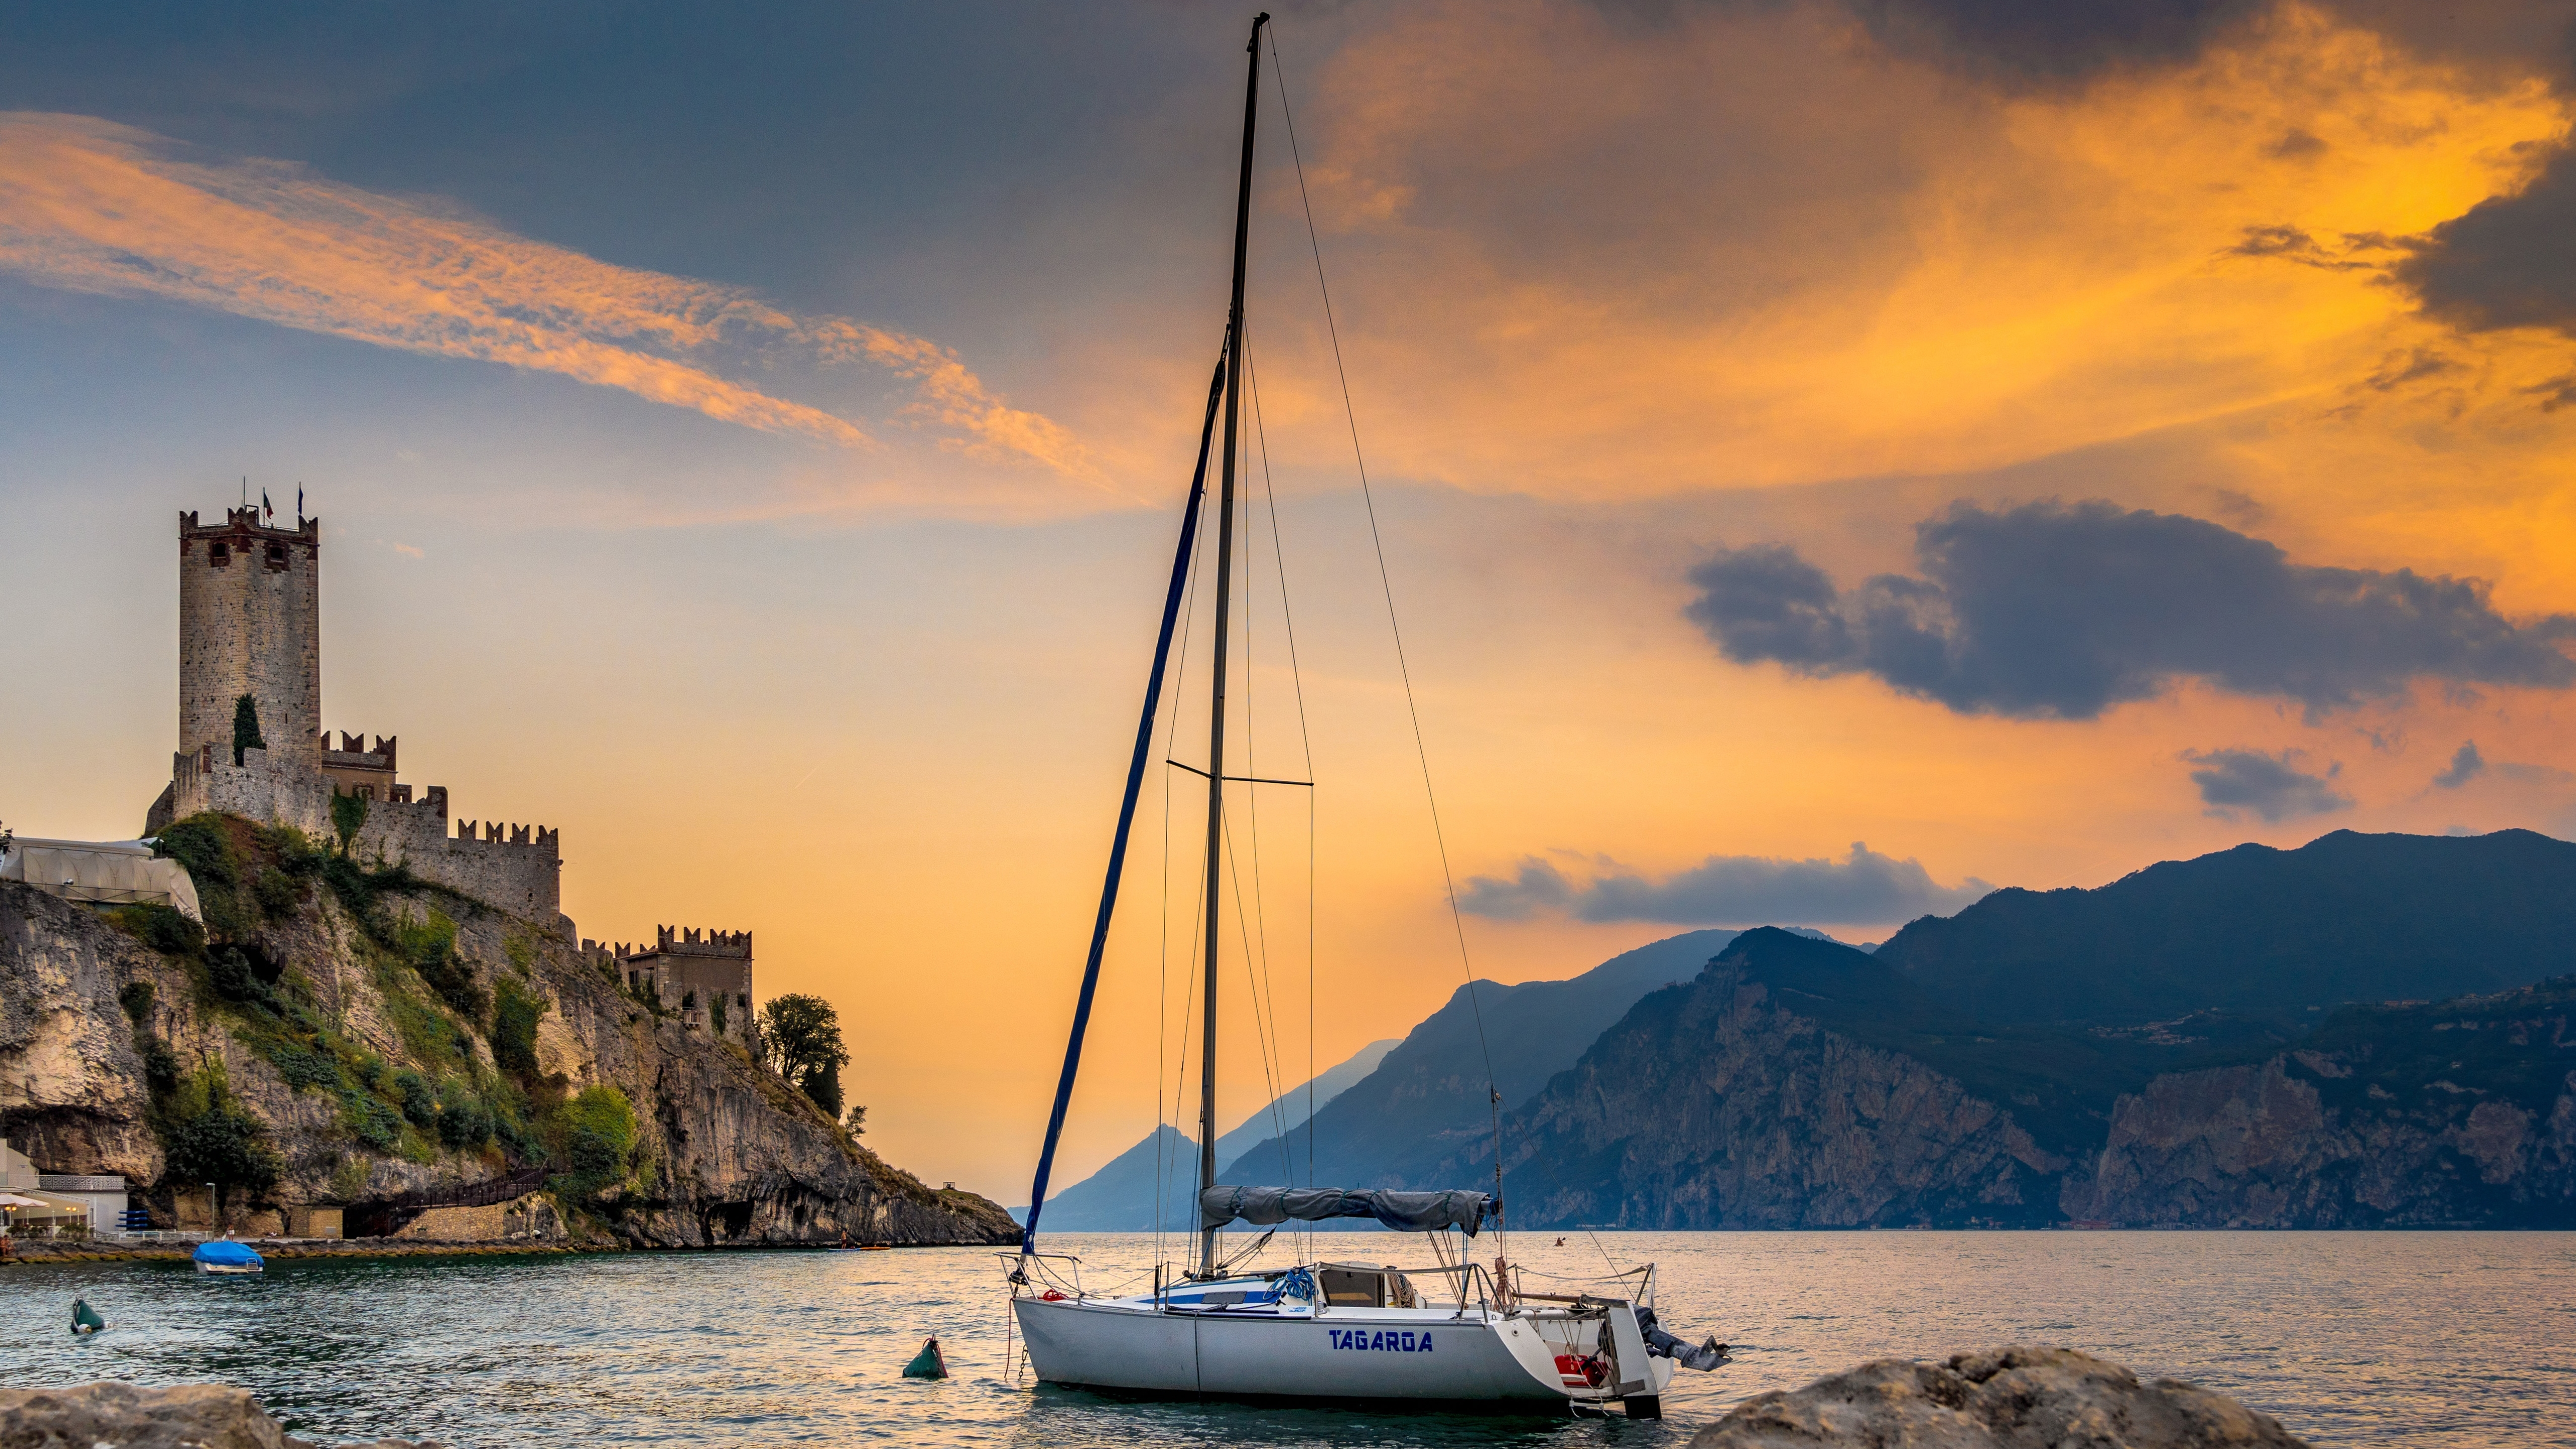 General 5120x2880 Italy lake garda boat sunset castle clouds sky water